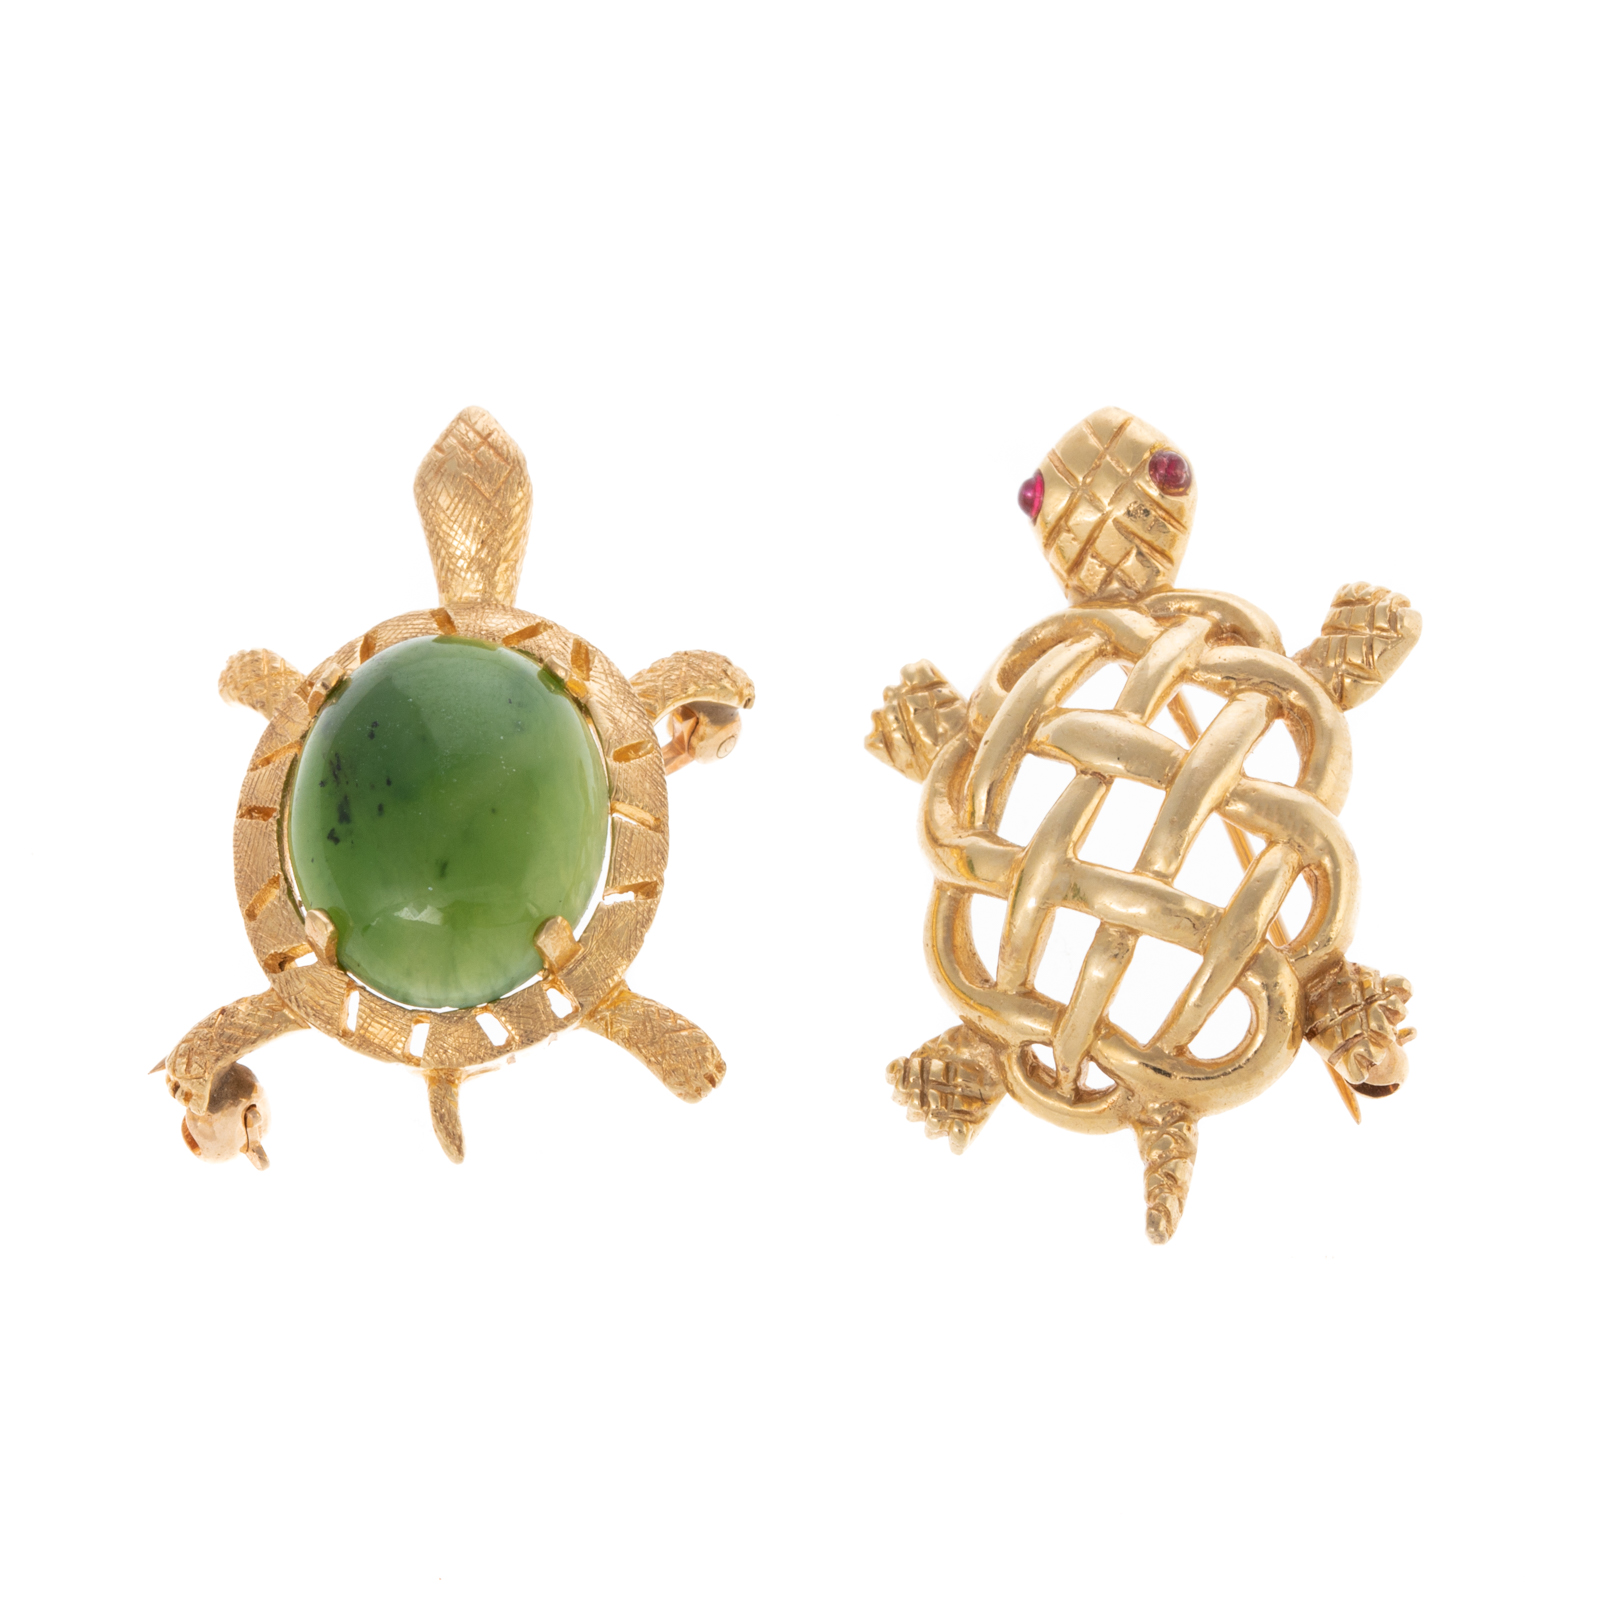 A PAIR OF TURTLE PINS IN 14K YELLOW 338541